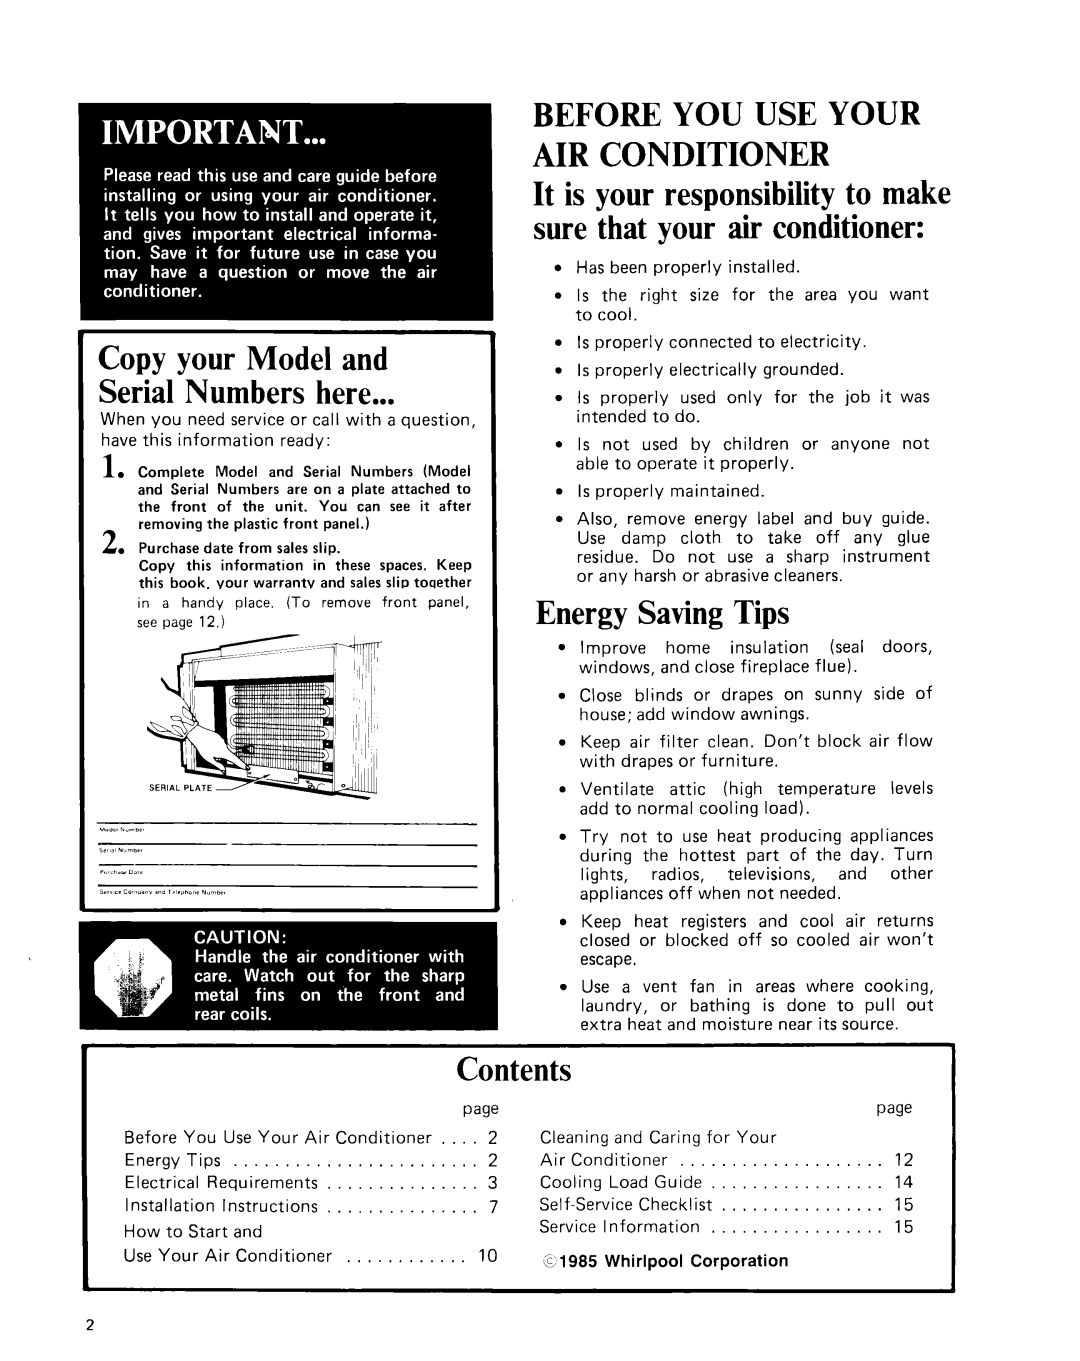 Whirlpool Air Conditioner manual Copy your Model and Serial Numbers here, Energy SavingTips, Contents, page 